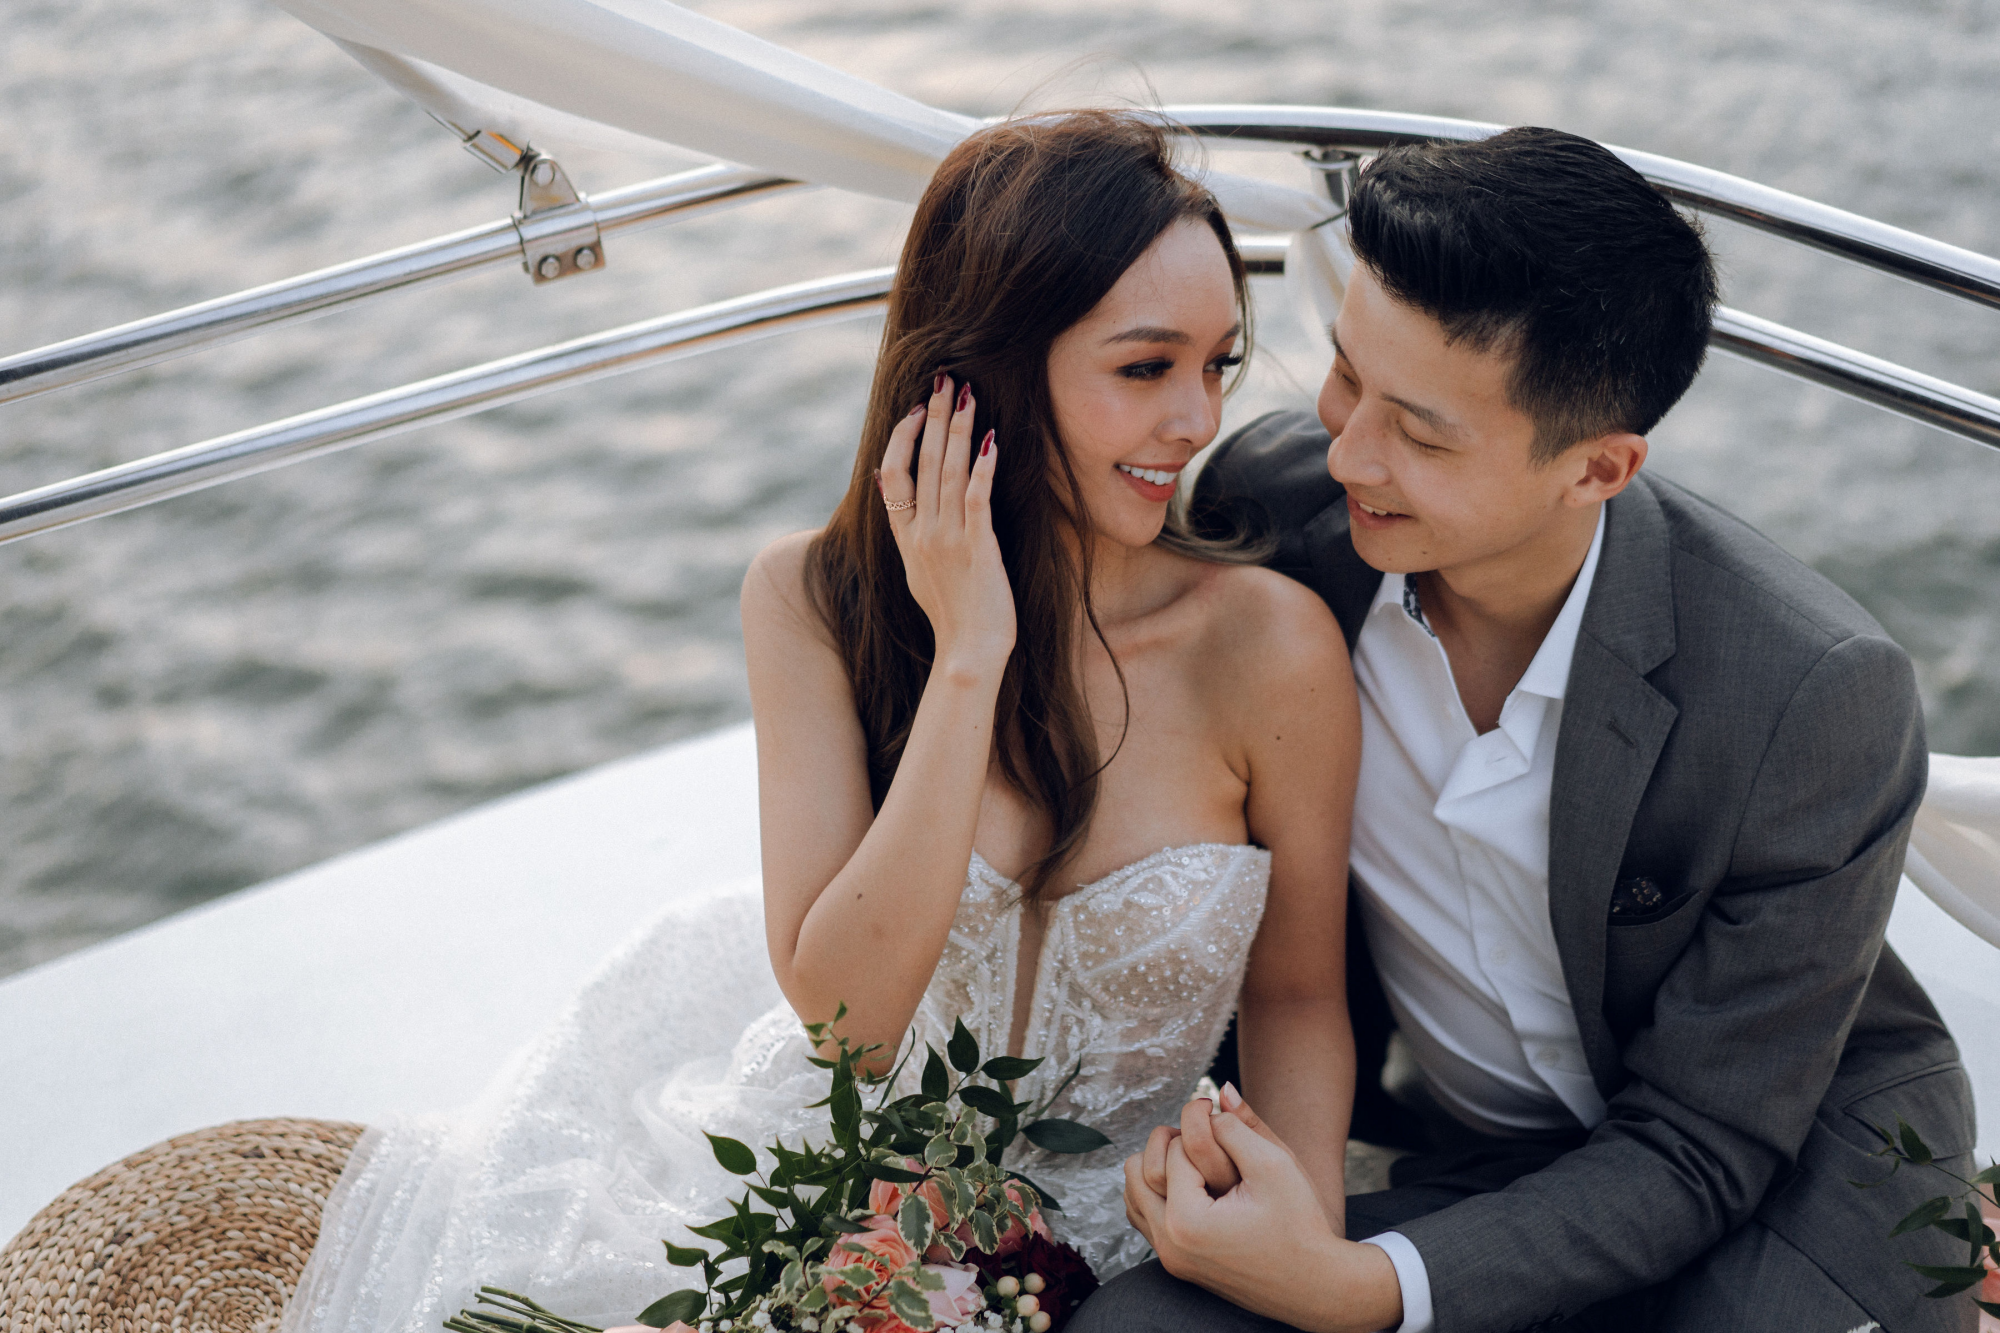 Sunset Prewedding Photoshoot On A Yacht With Romantic Floral Styling by Samantha on OneThreeOneFour 19